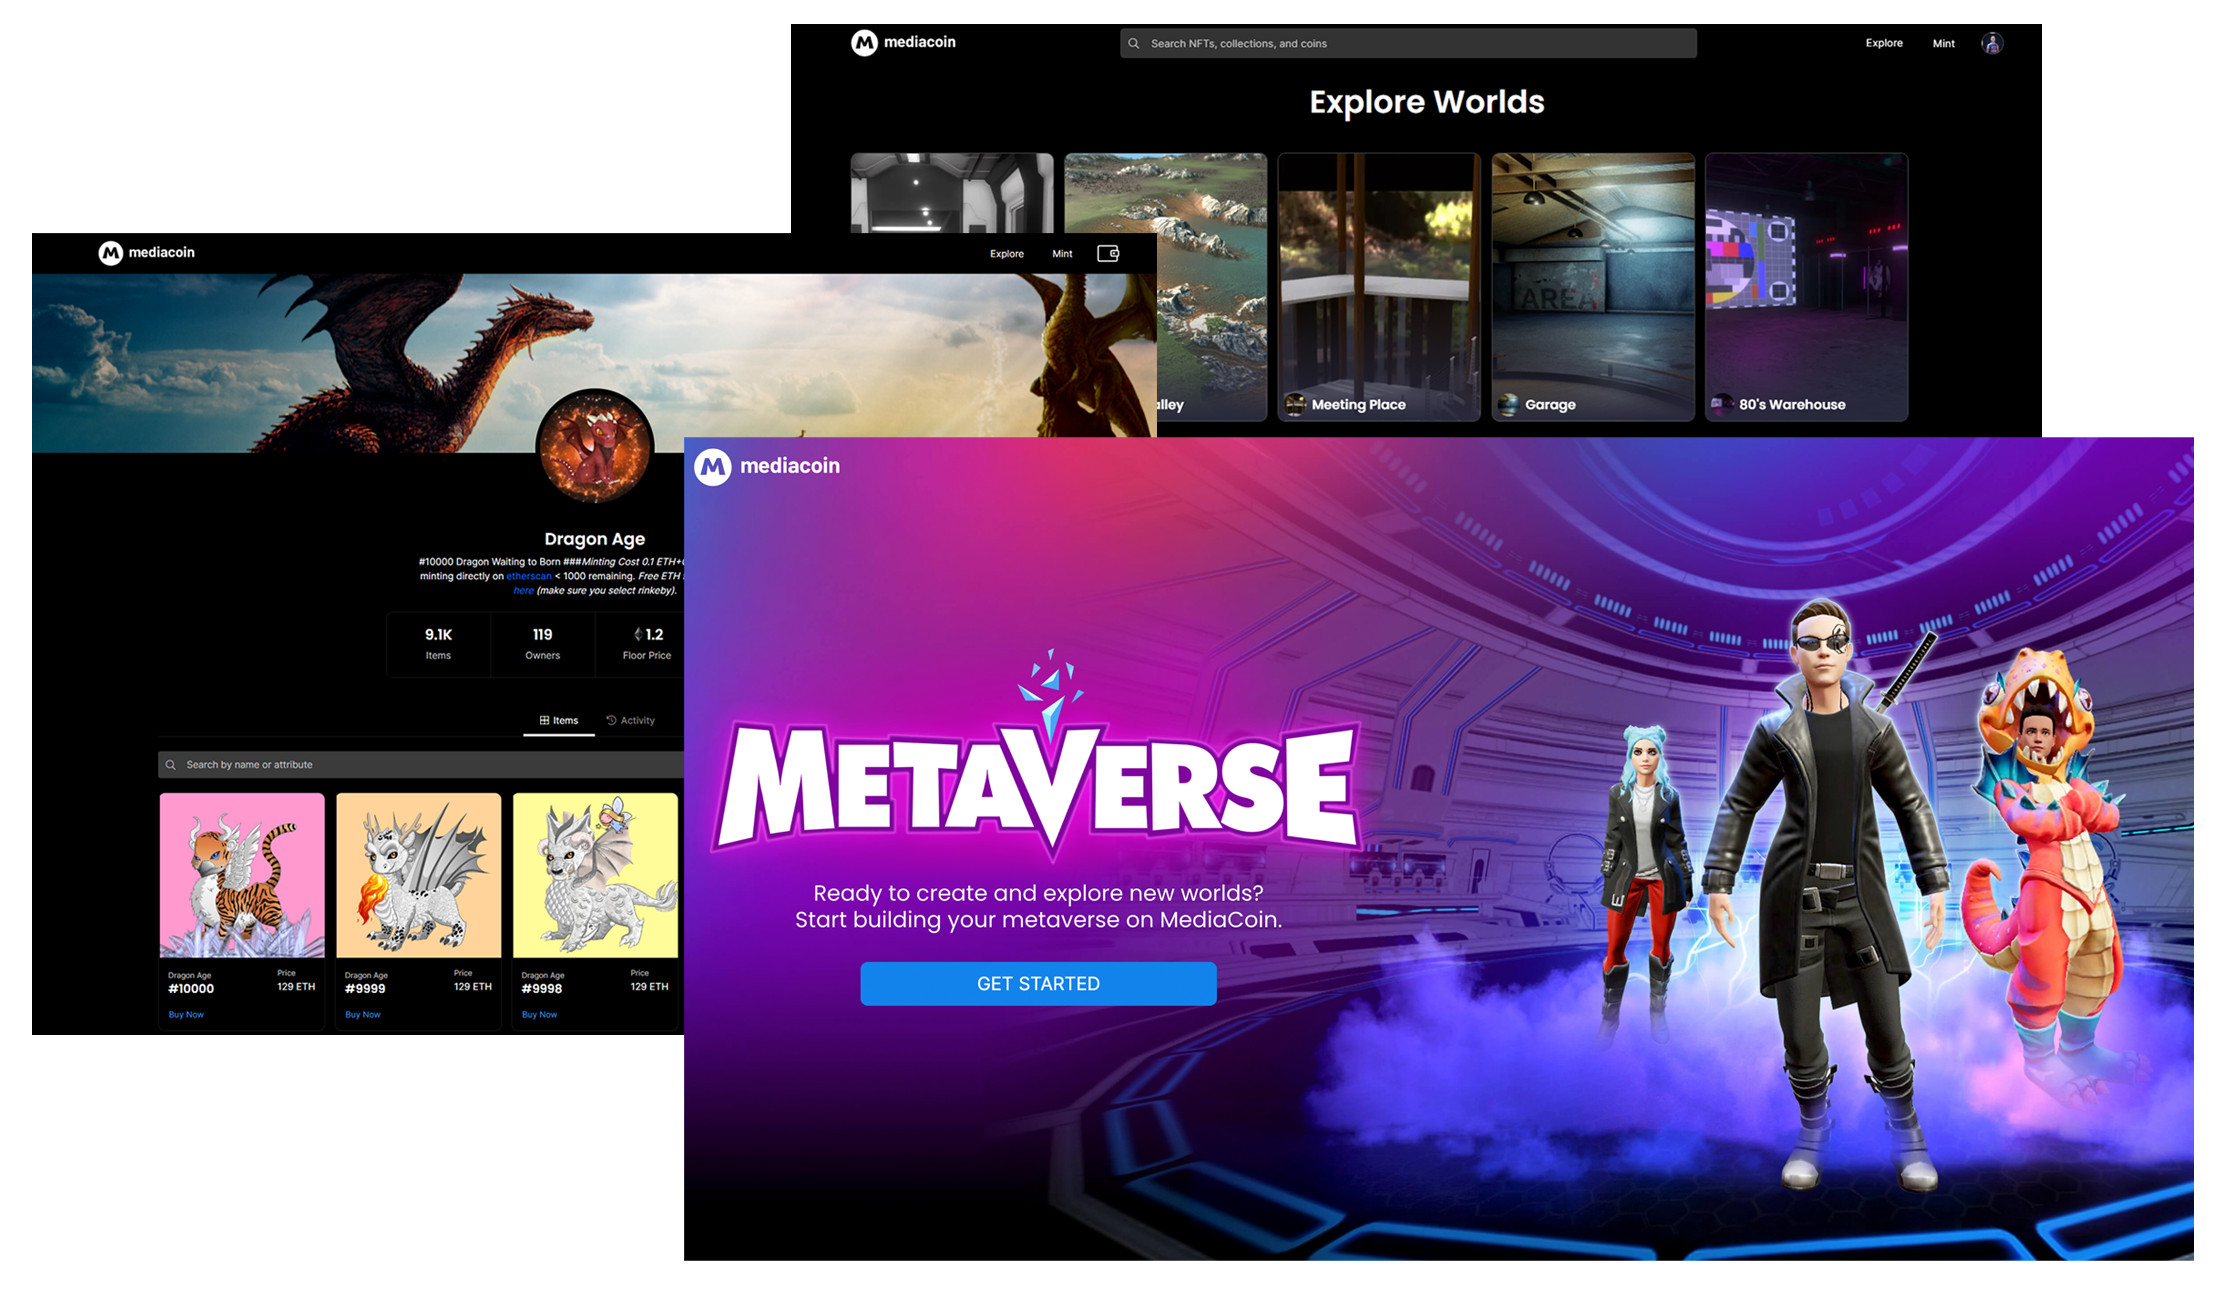 MediaCoin screen for creating and managing collections, as well as an inset of three metaverse gaming characters: a cybersoldier woman with a laser rifle, a glam-space-age panda with a helmet and guitar, and a mad scientist. featured Image